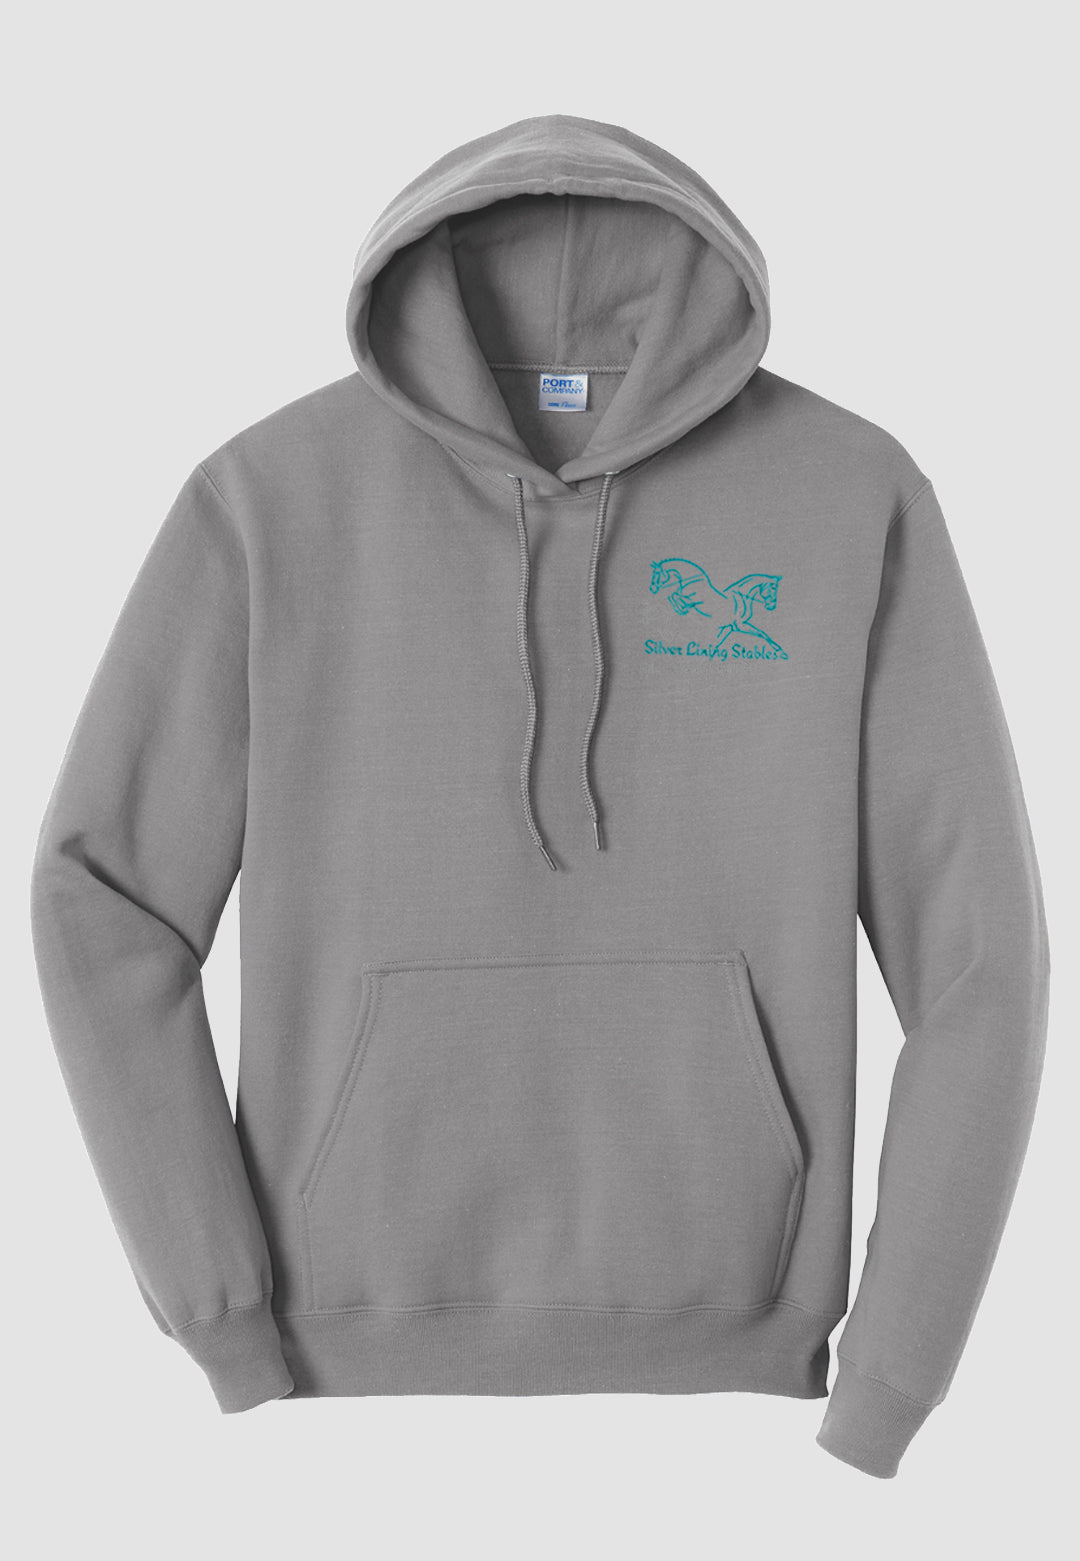 Silver Lining Stables Port & Company® Core Fleece Adult Pullover Hooded Sweatshirt - 2 Color Options